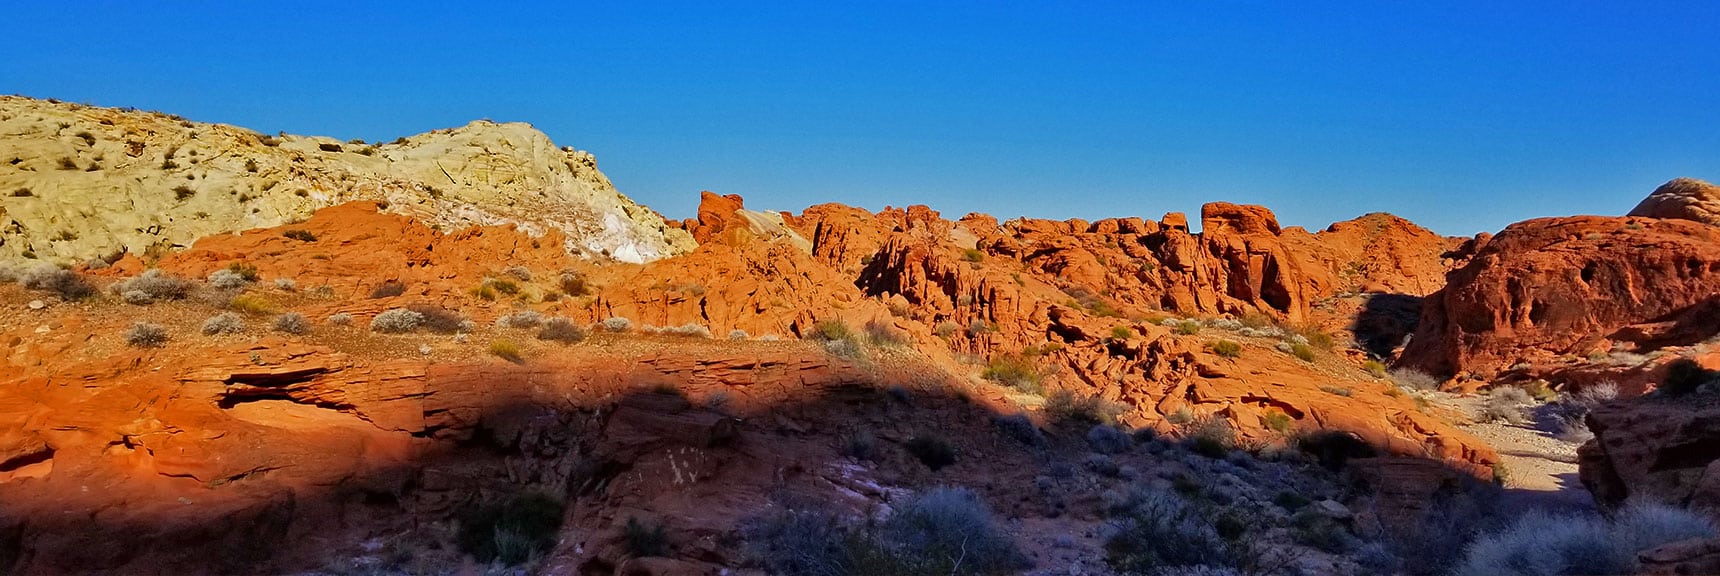 Contrasting Red and White Rock Formations in the Northern Portion of Prospect Trail in Valley of Fire State Park, Nevada